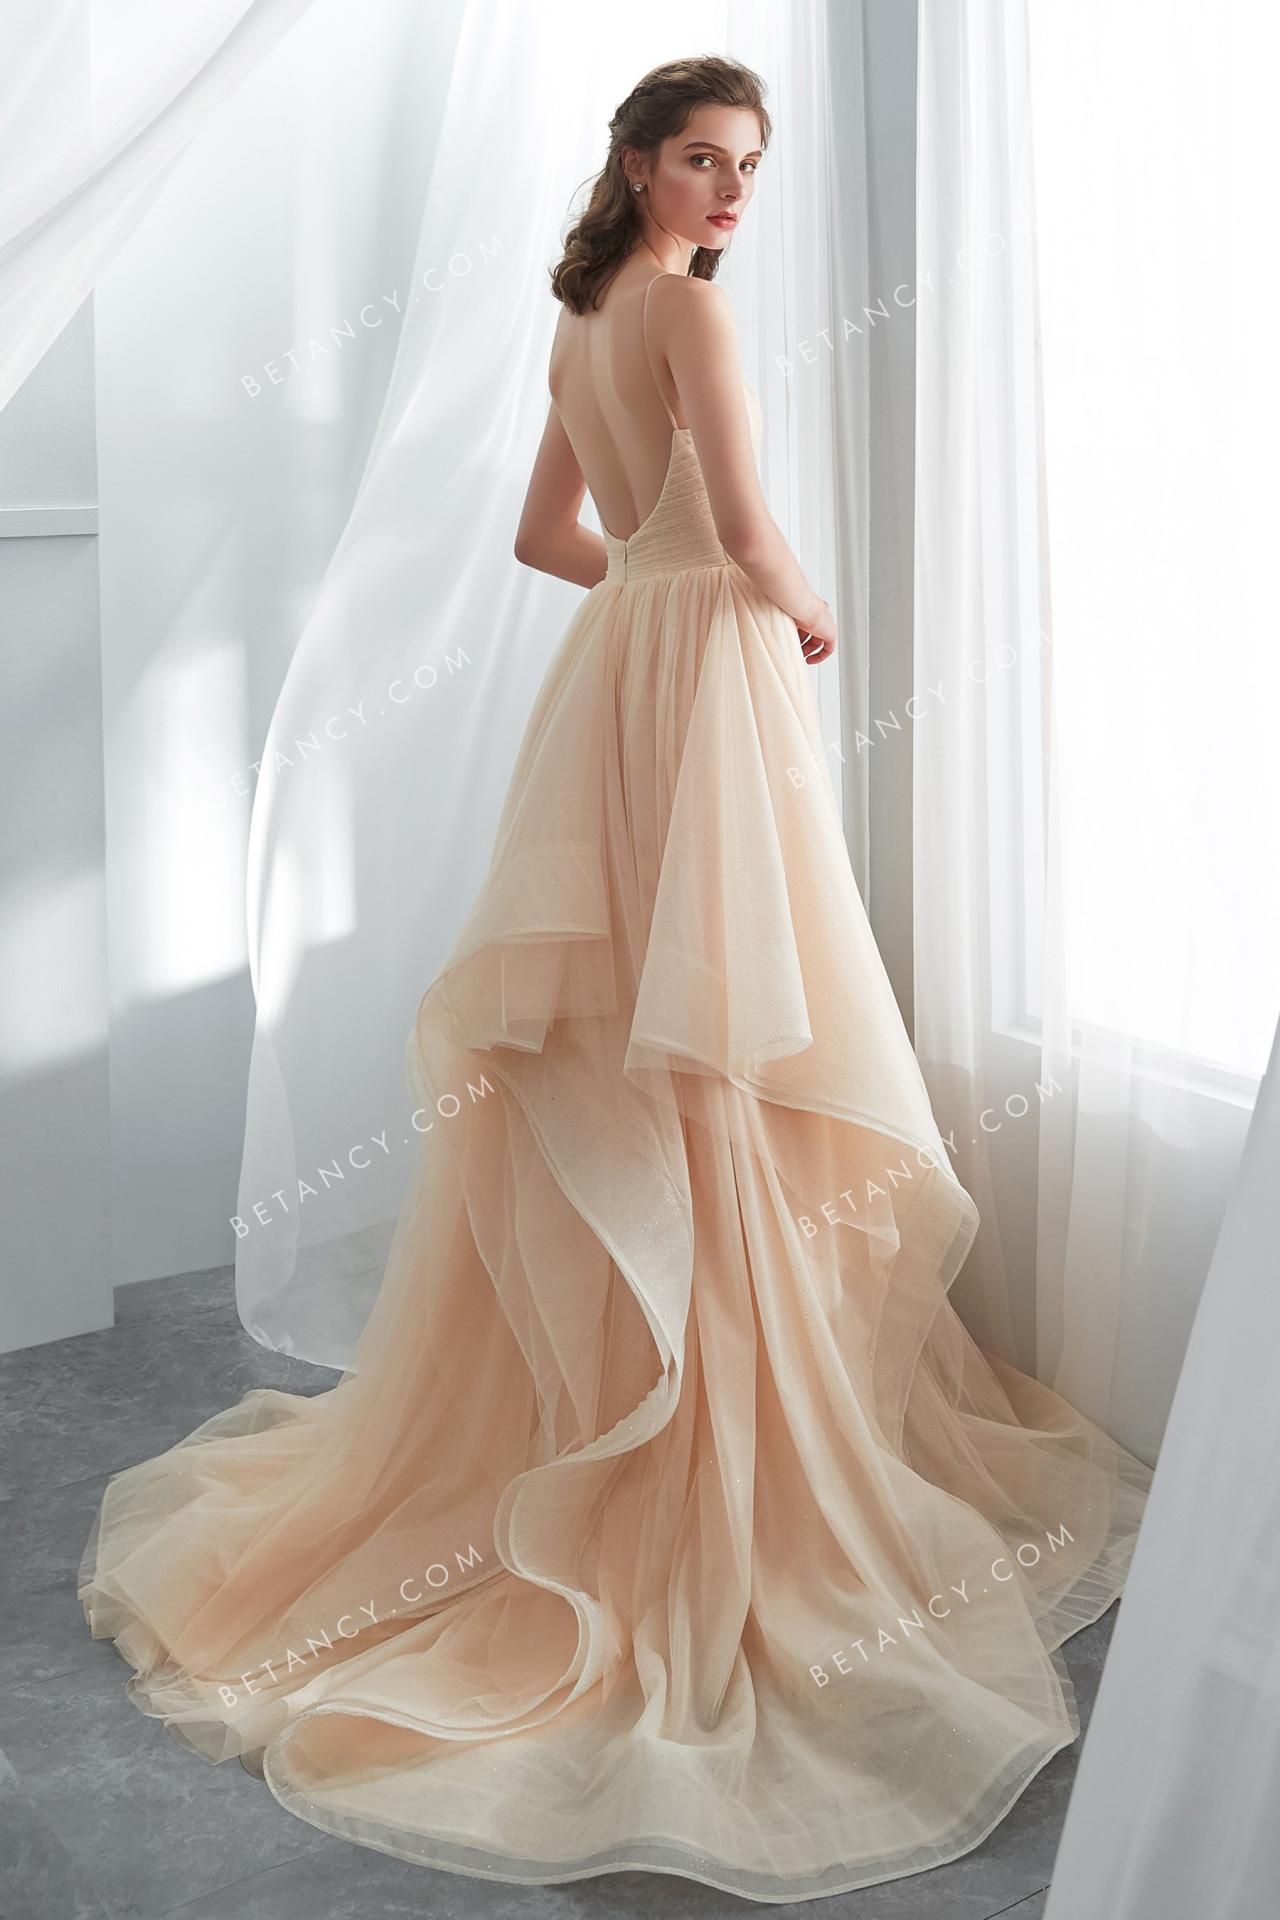 Fabulous soft tulle skirt champagne wedding gown 3